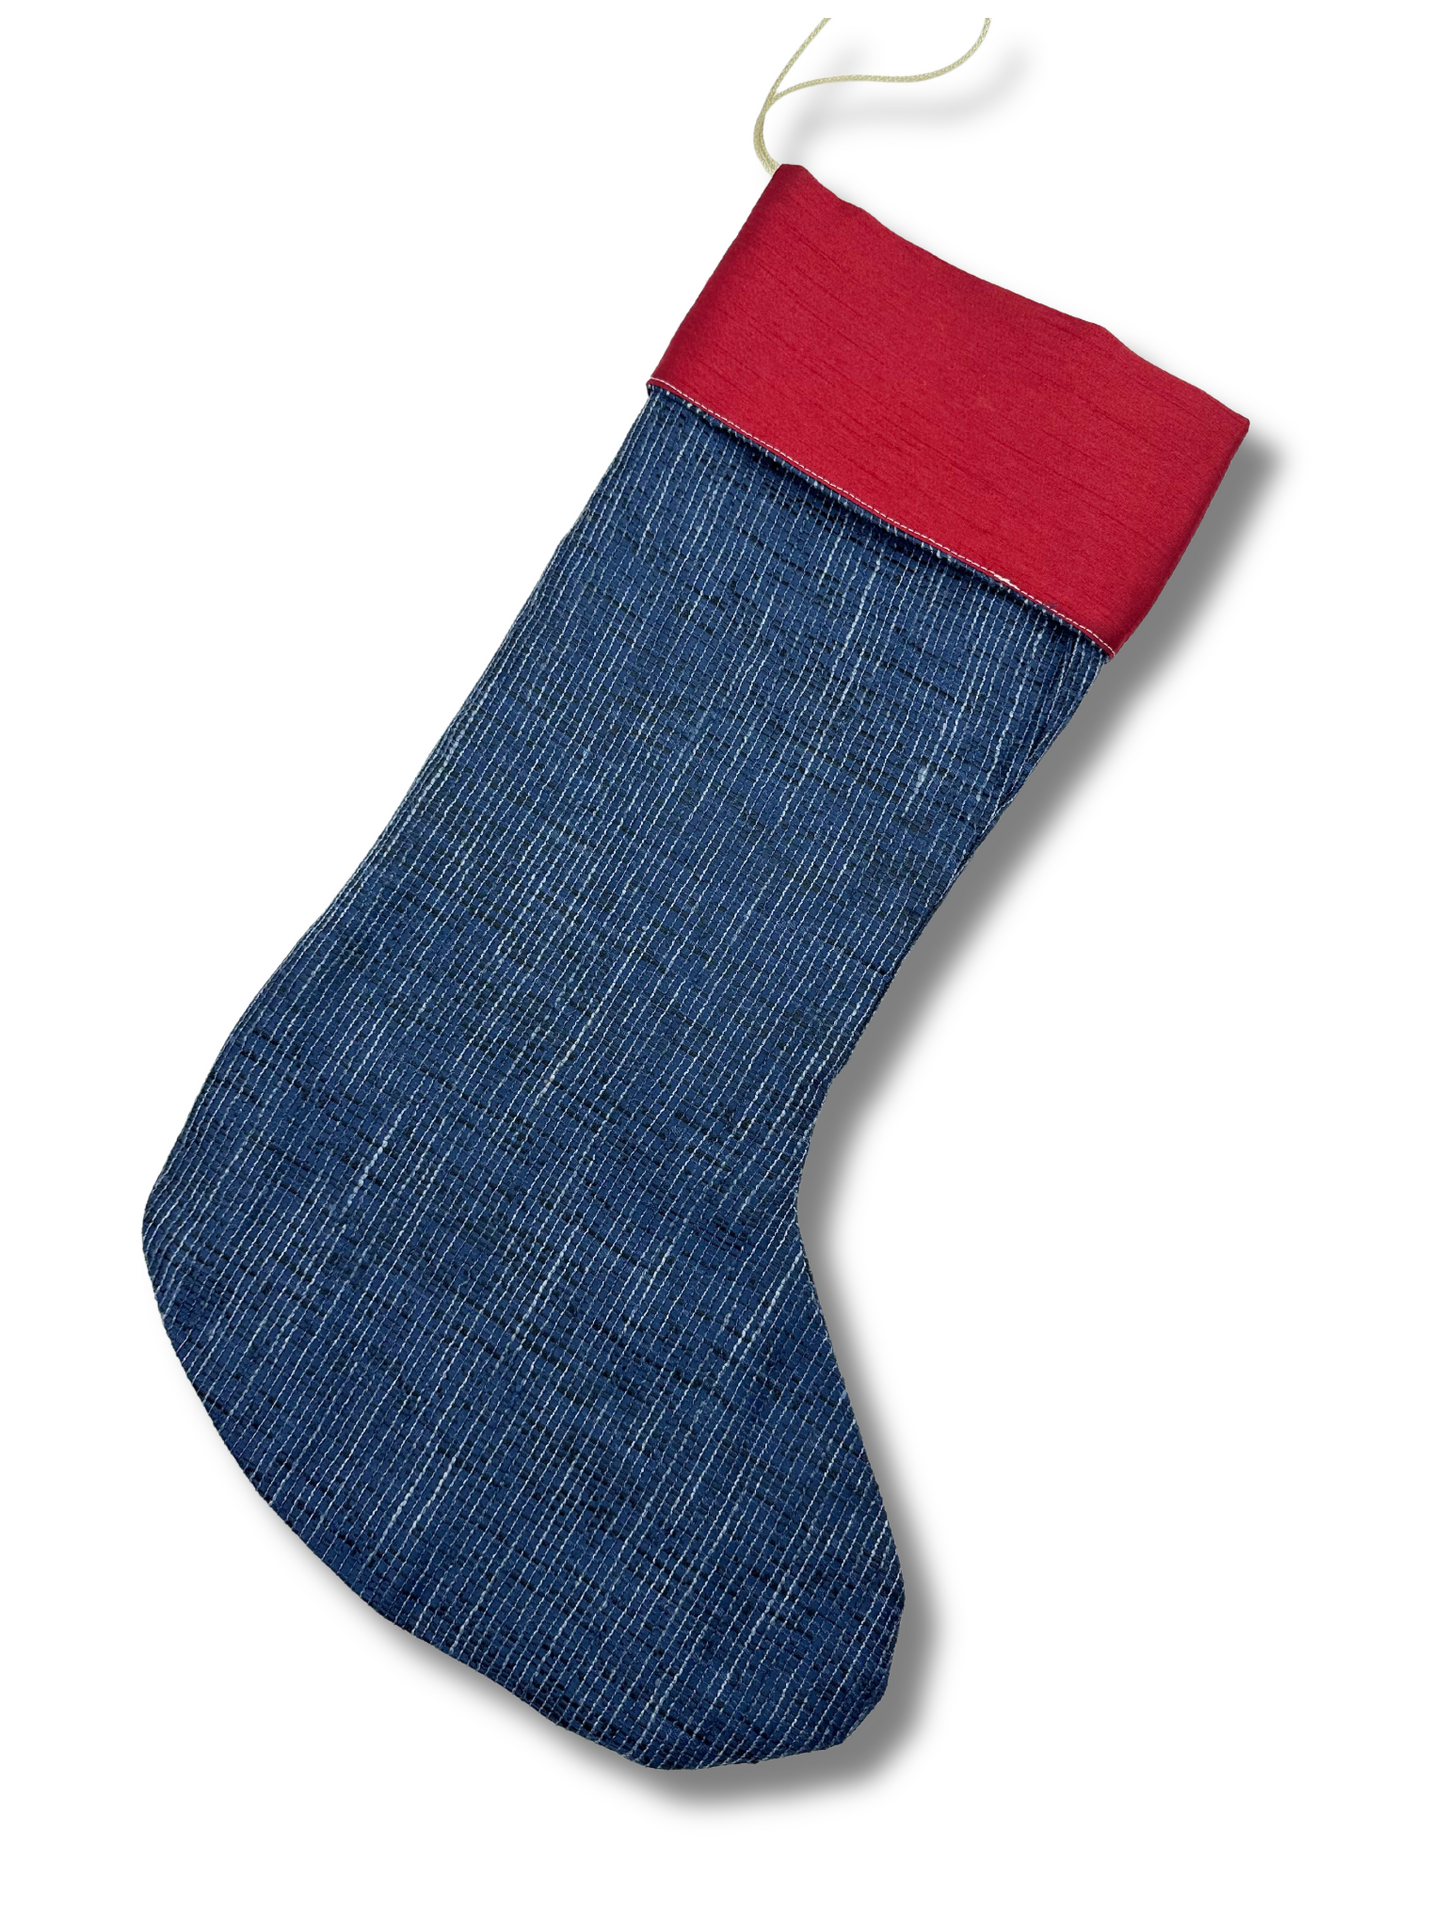 Christmas Stocking-Reversible- Blue and Red